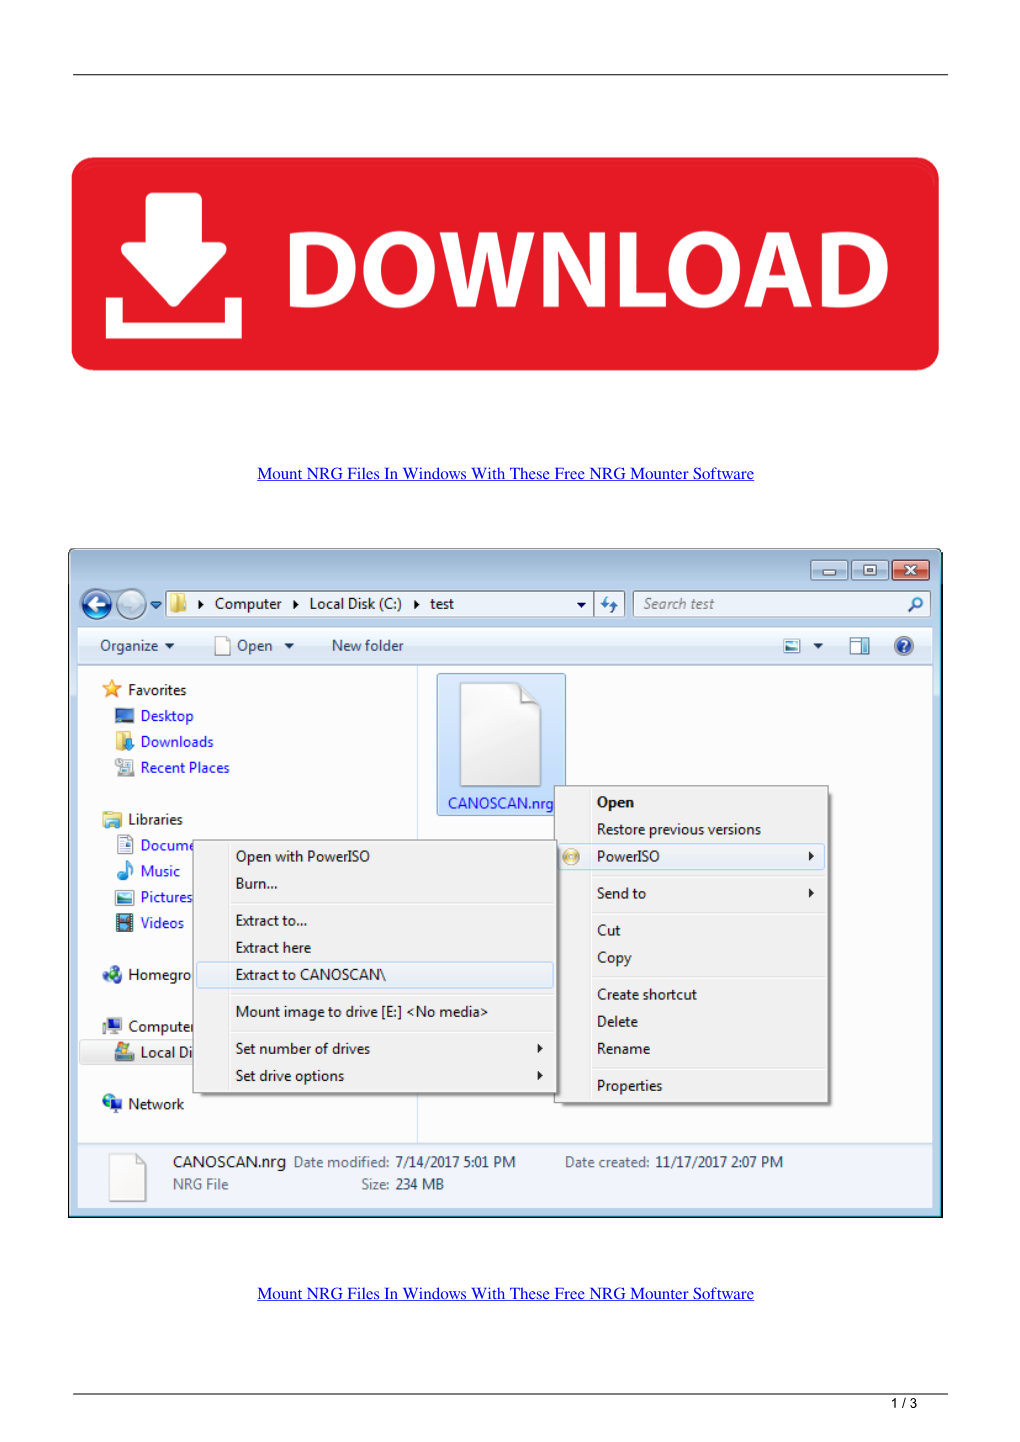 Mount NRG Files in Windows with These Free NRG Mounter Software